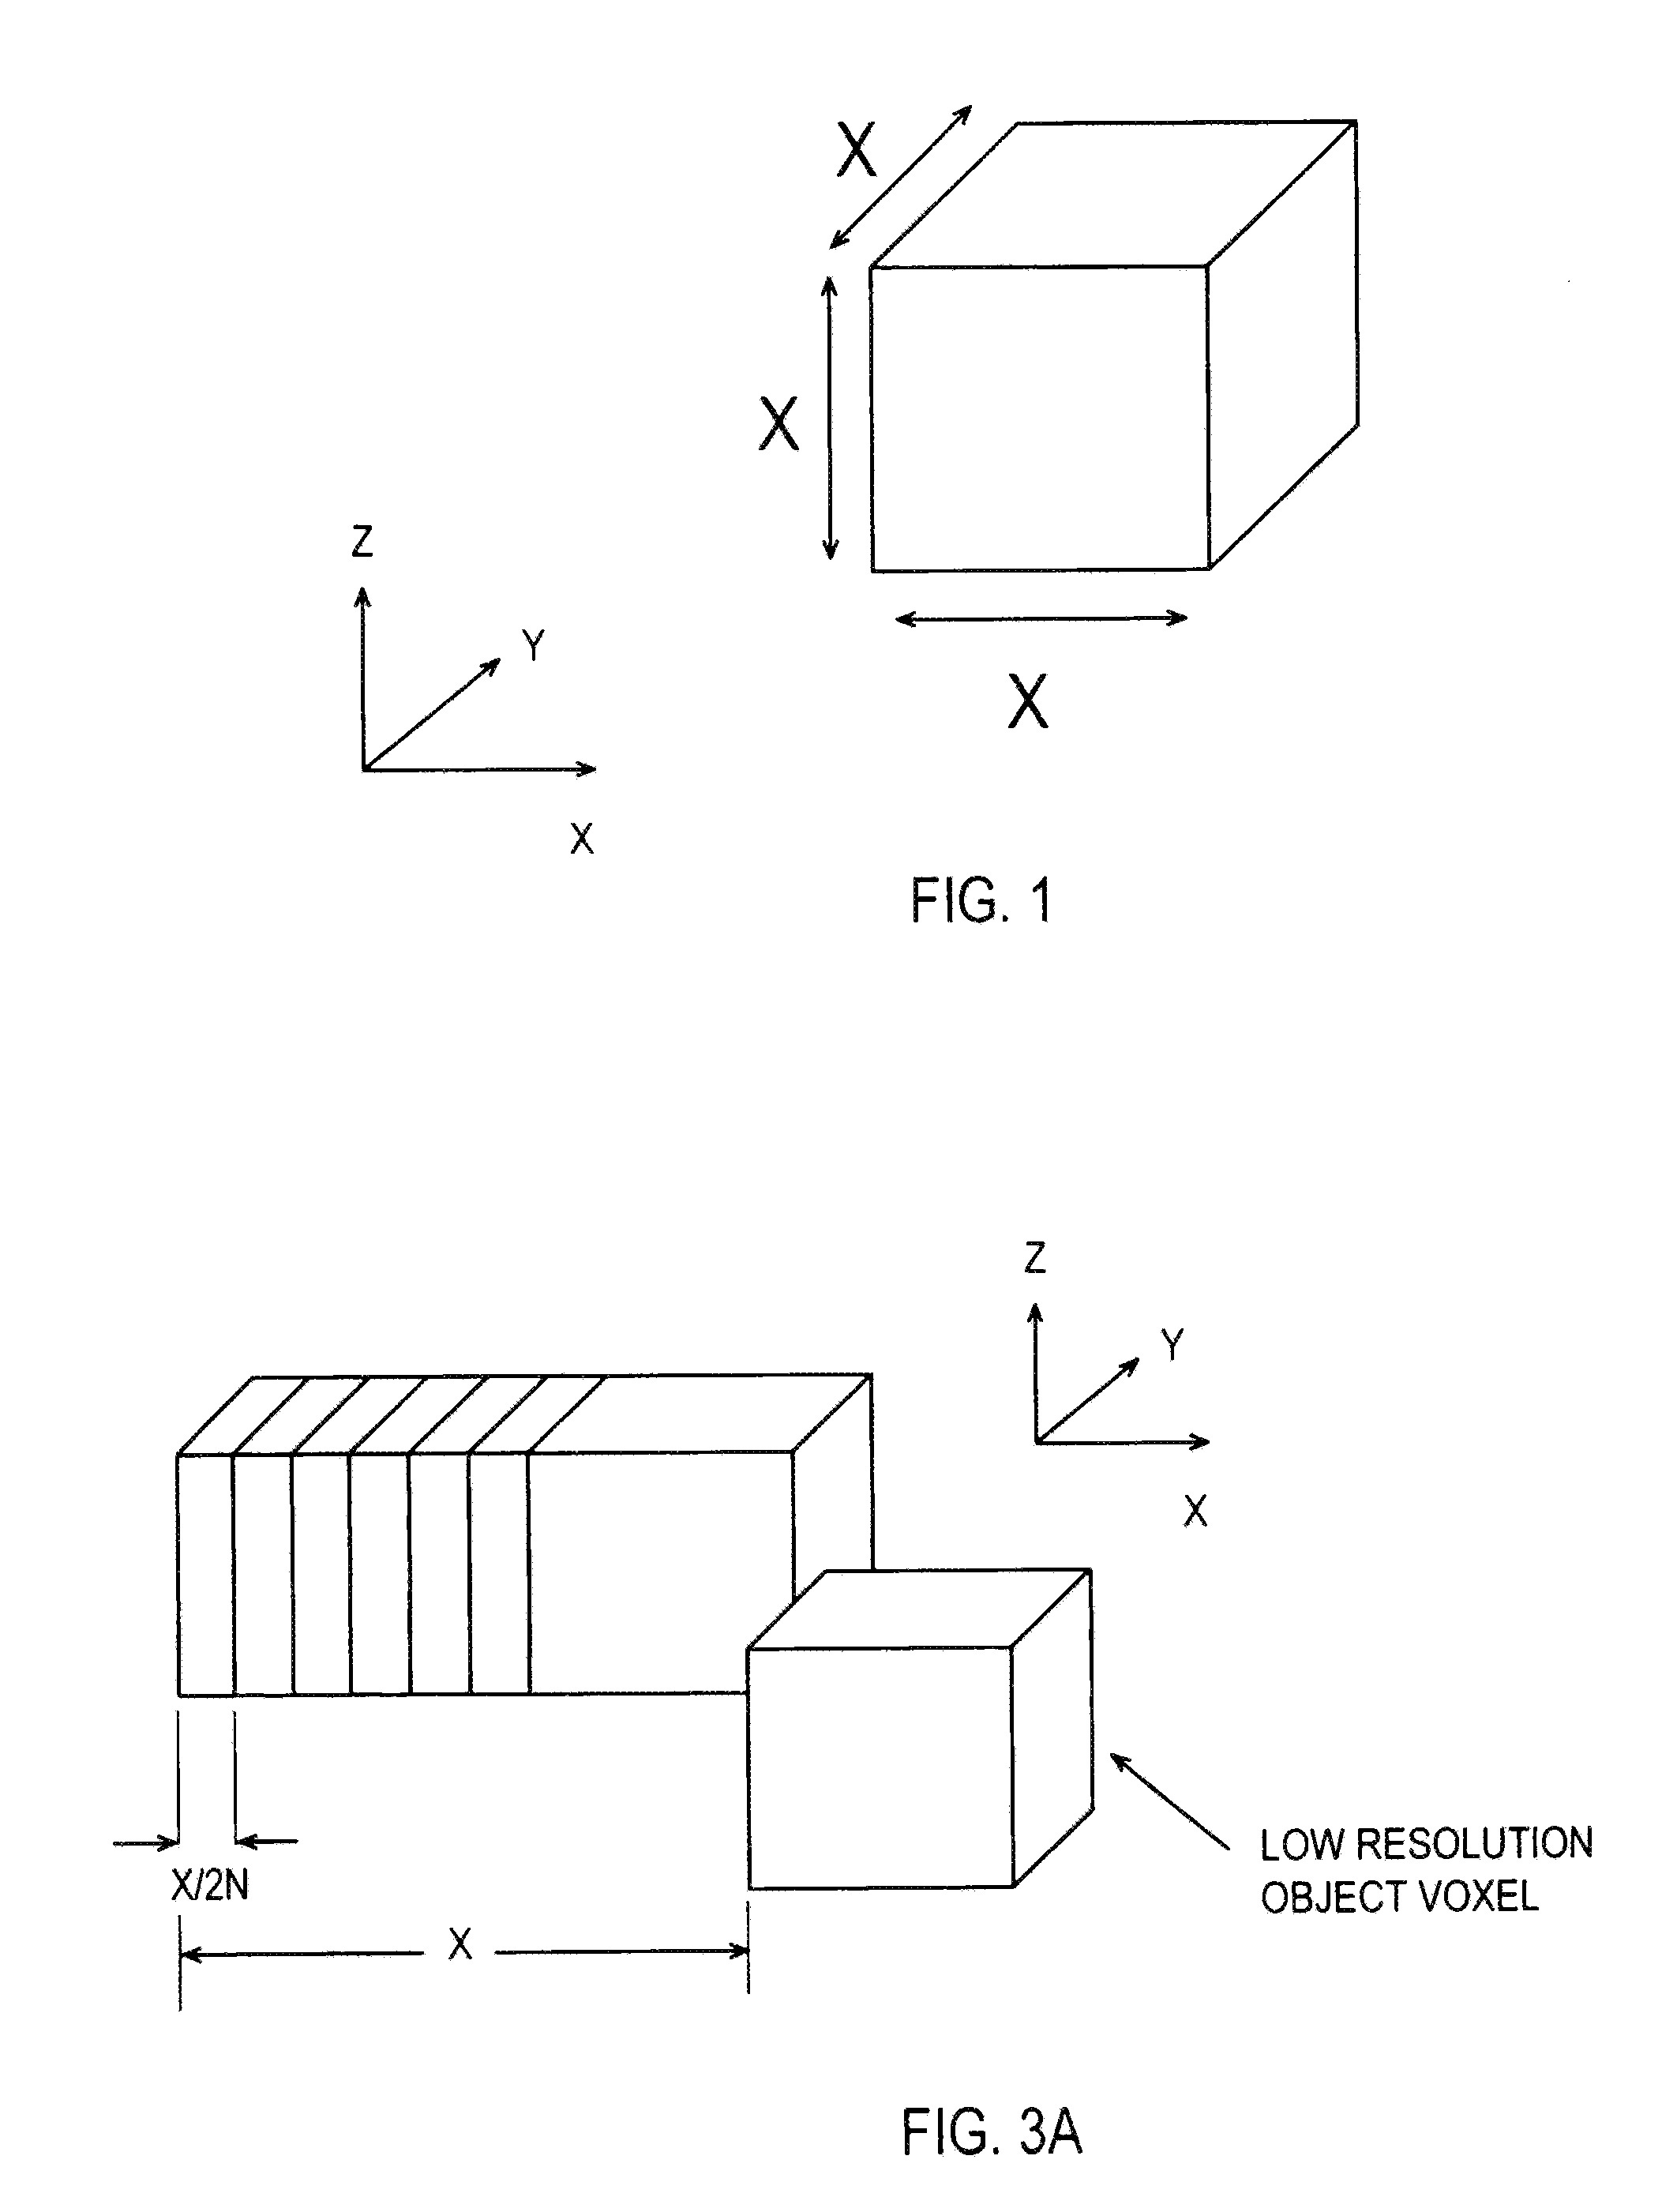 Methods and systems for realizing high resolution three-dimensional optical imaging